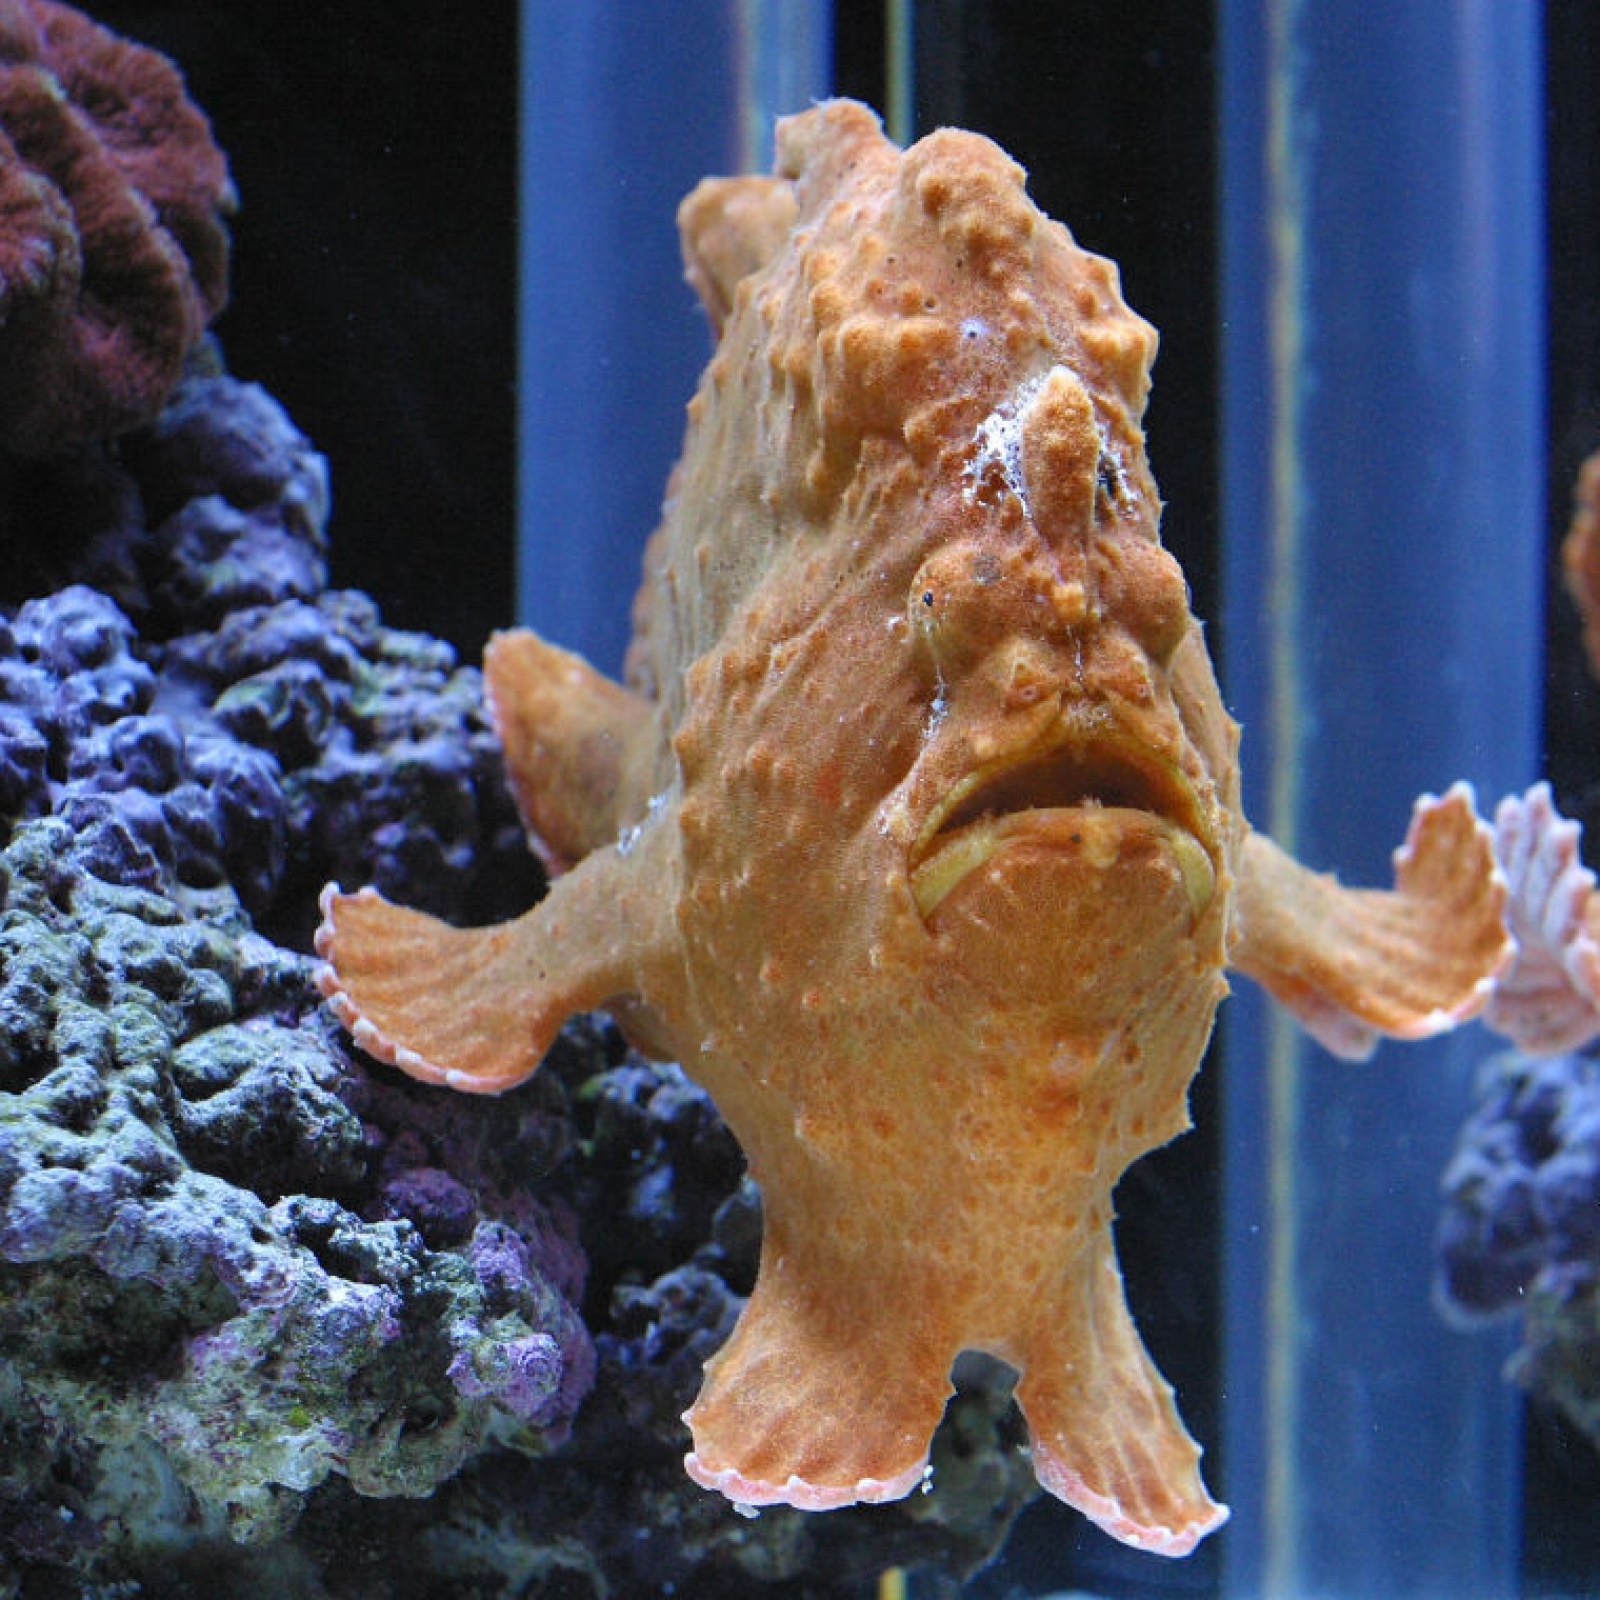 17 of the Weirdest-Looking Fish on Planet Earth